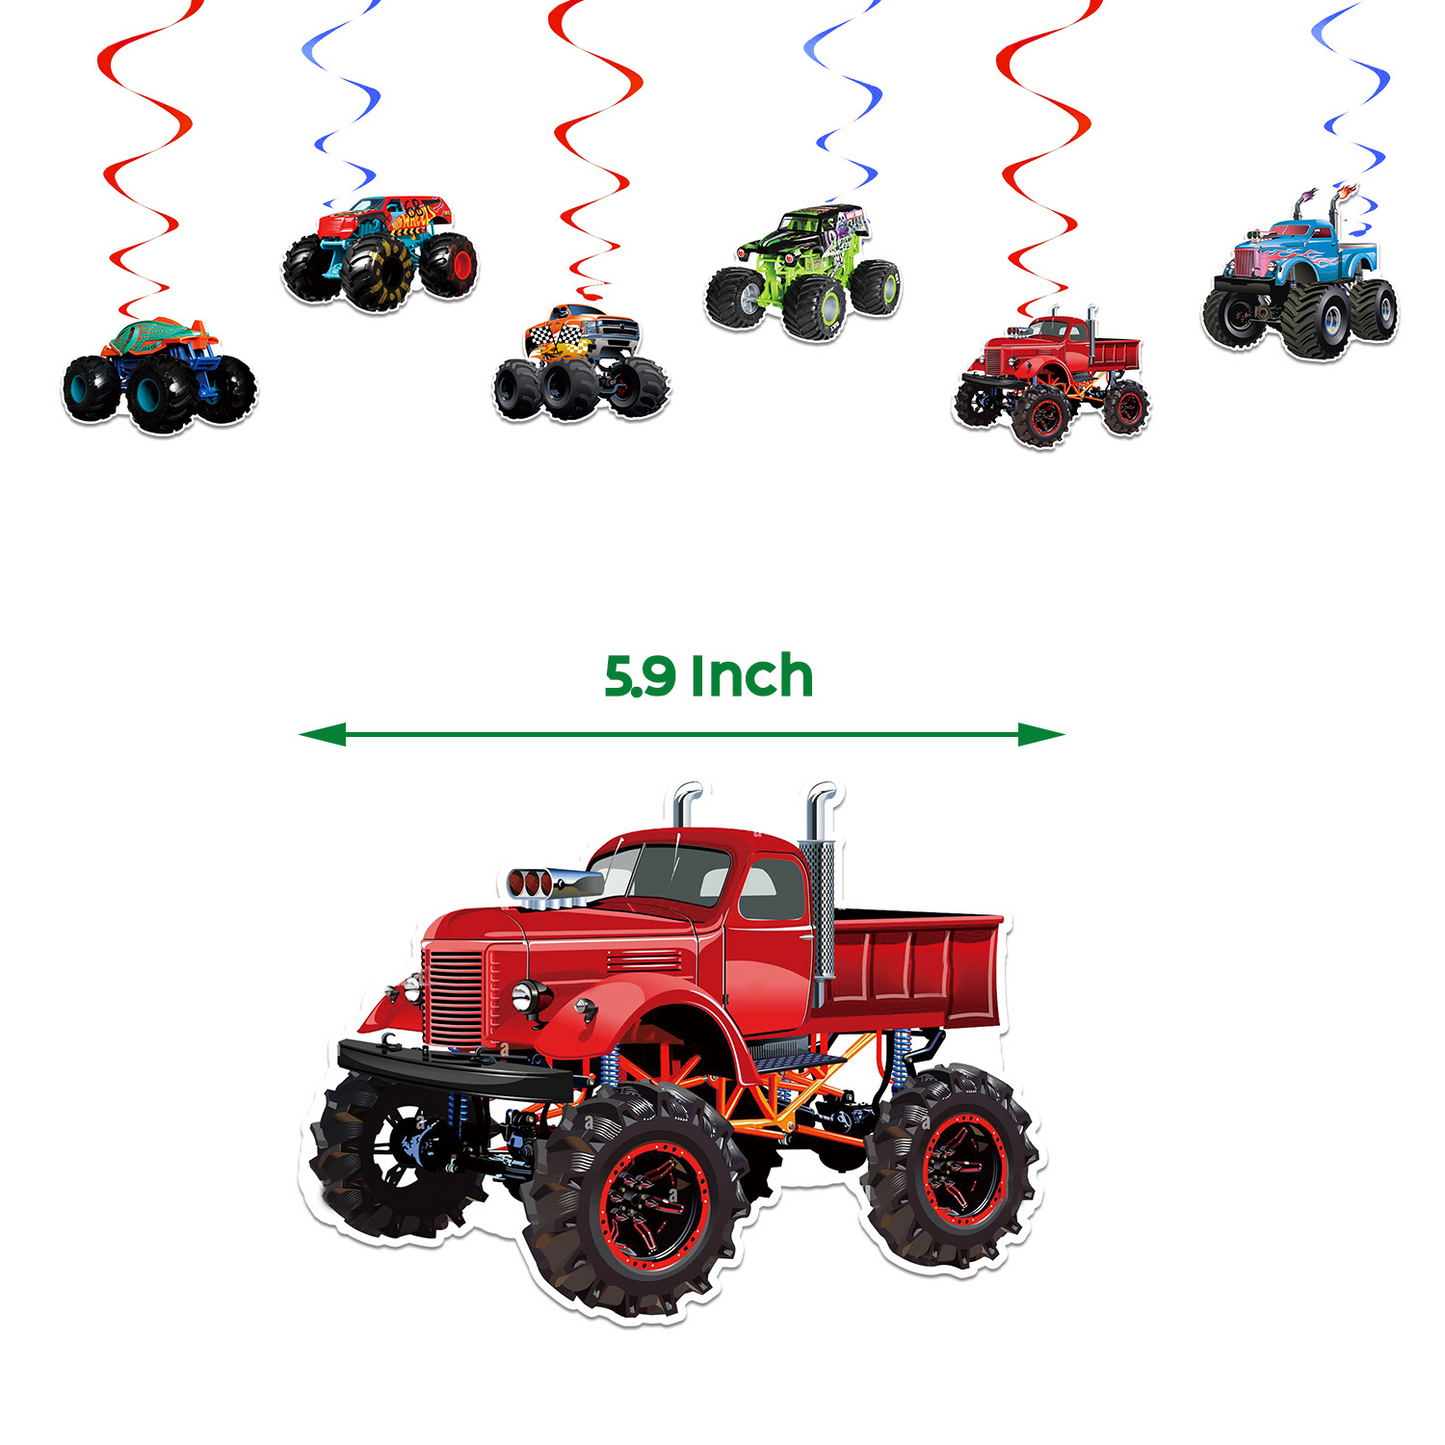 Monster Truck Decorations